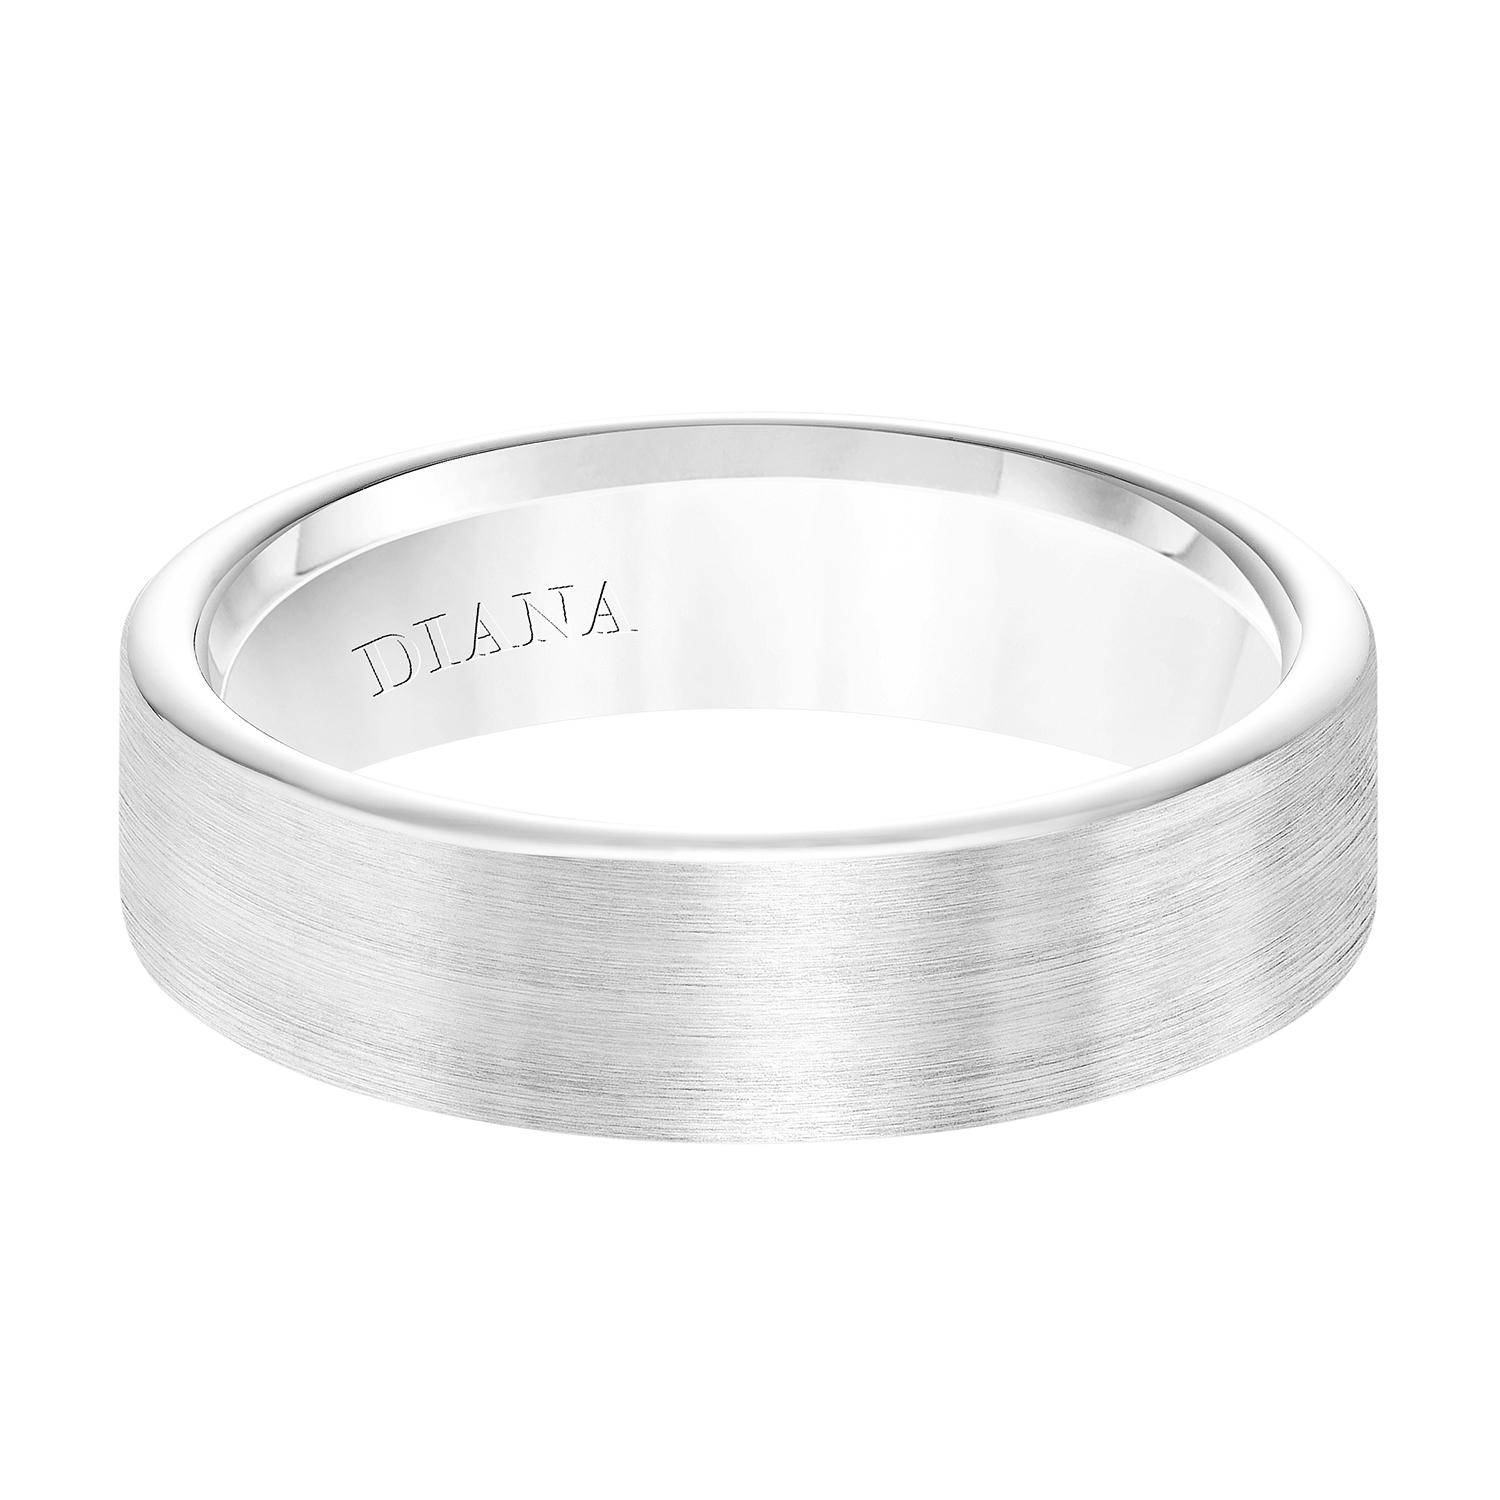 Gents 14K White Gold 6mm Wedding Band with Satin Finish 0